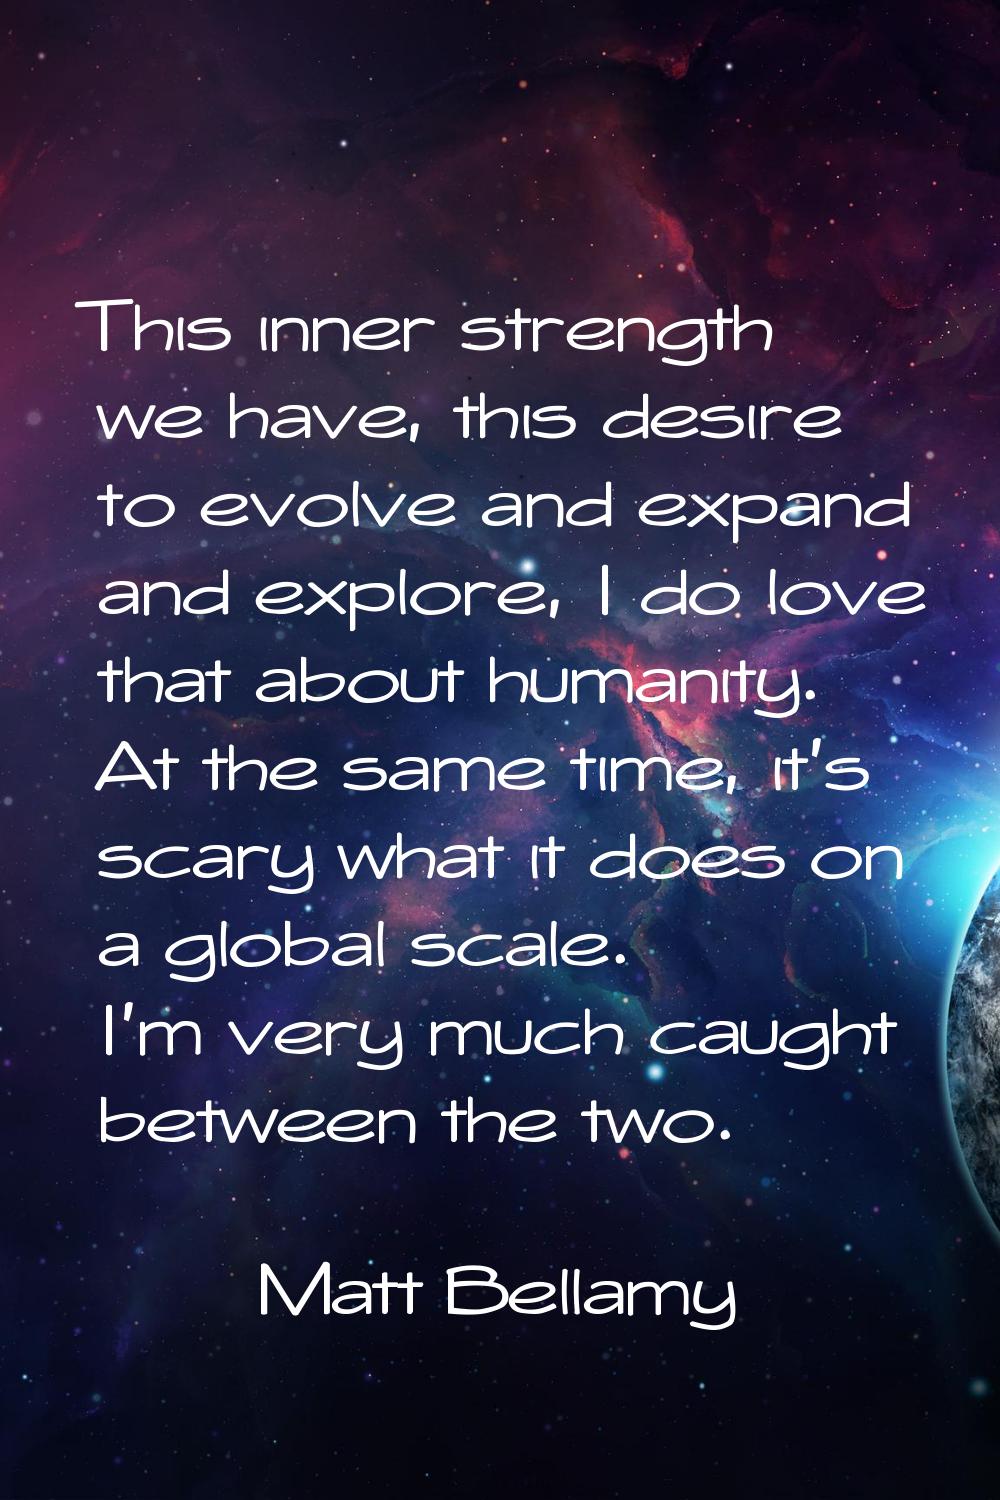 This inner strength we have, this desire to evolve and expand and explore, I do love that about hum